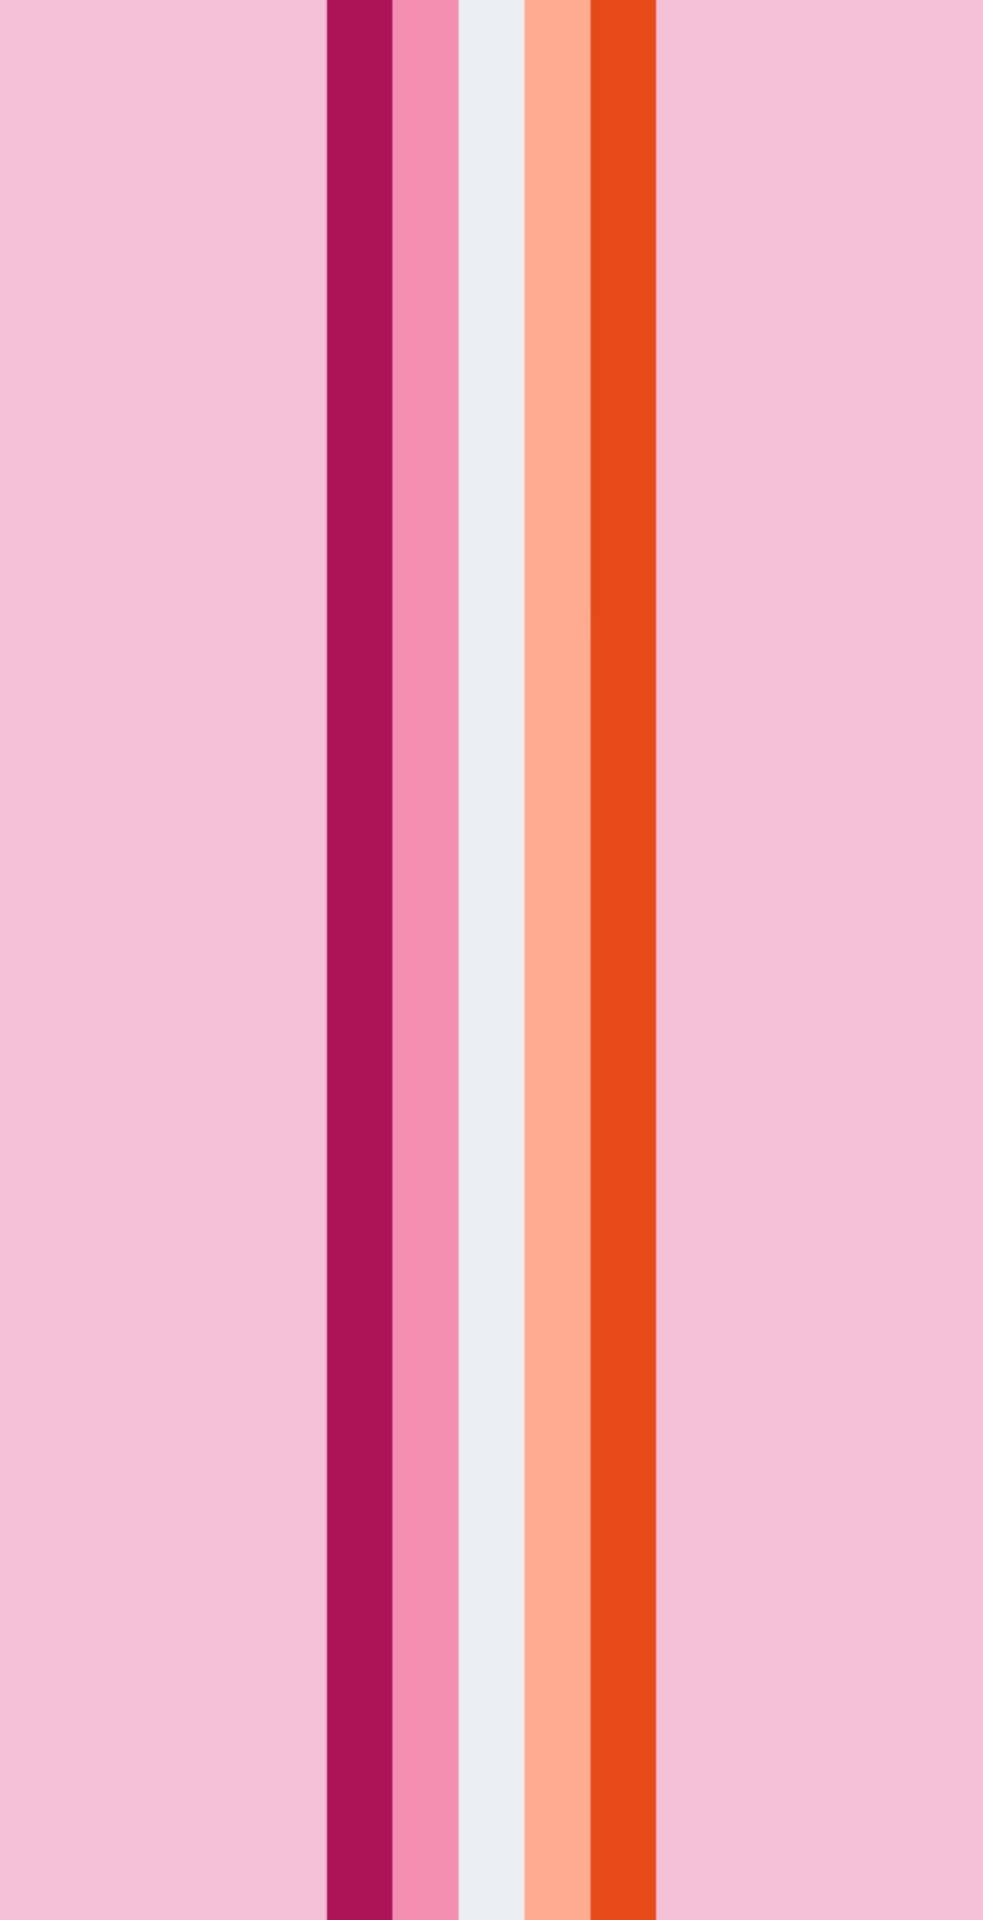 Lesbian Pride Flag With Shades Of Pink